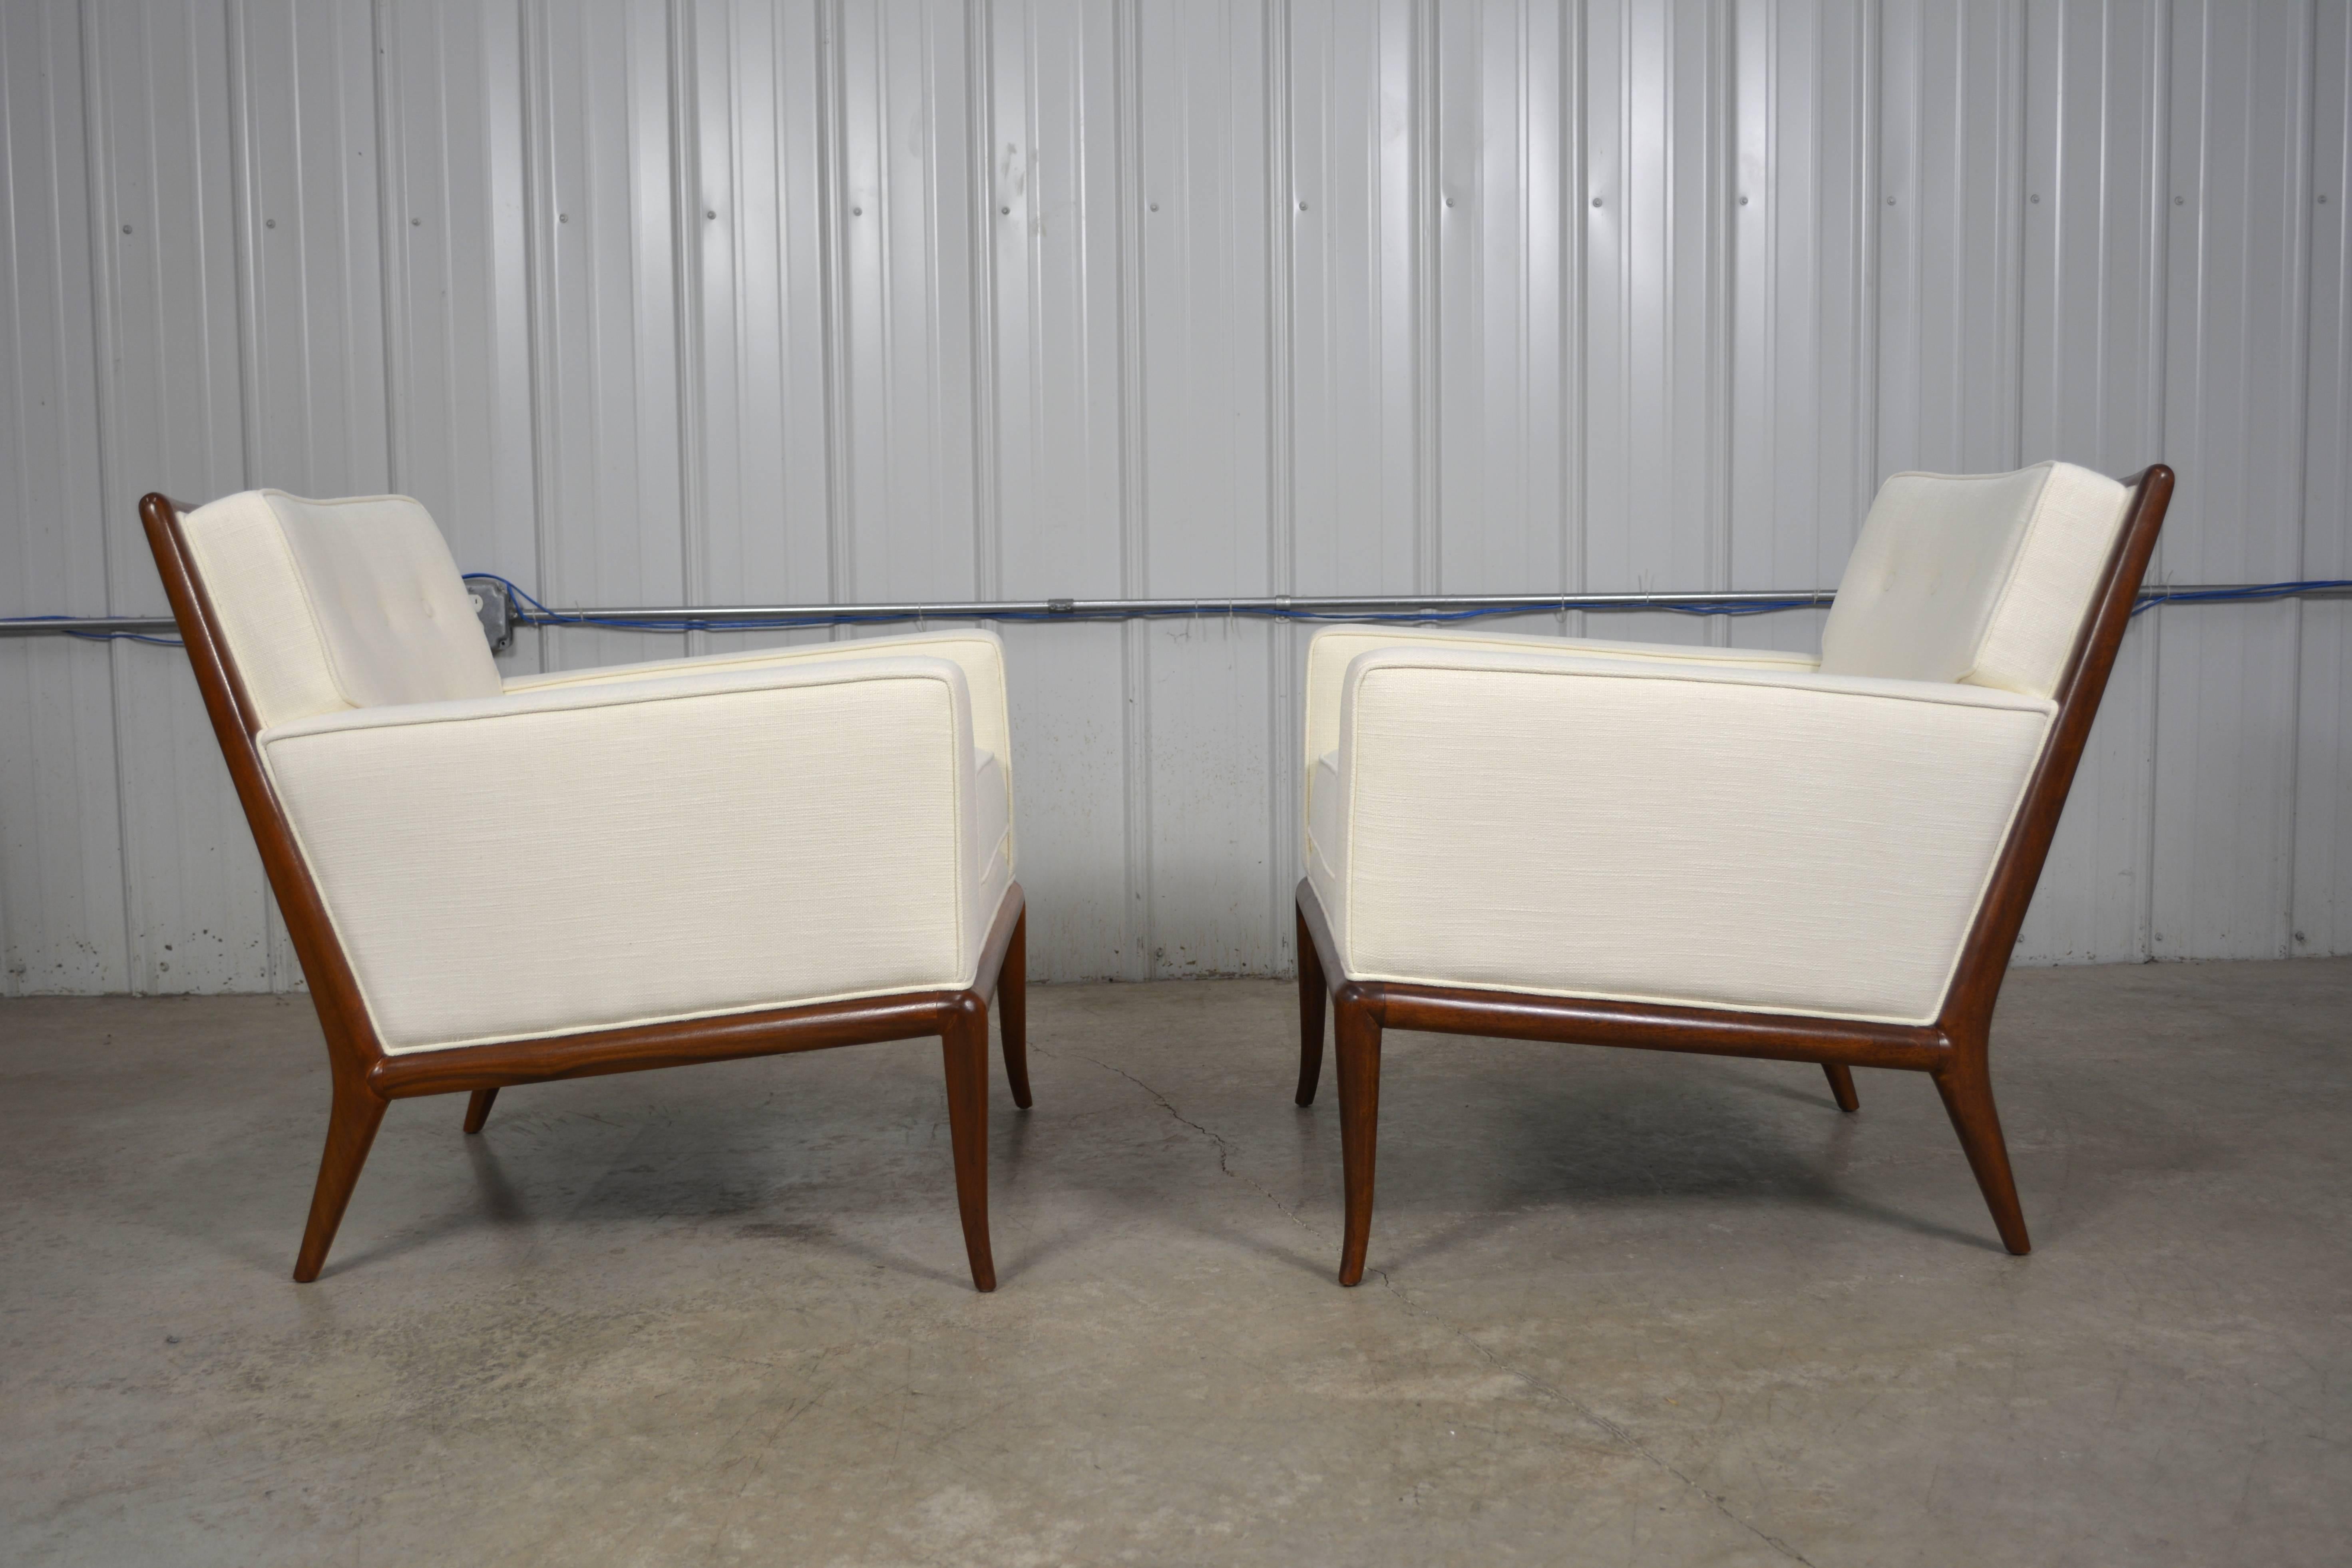 A pair of lounge chairs designed by T.H. Robsjohn-Gibbings for Widdicomb. Walnut frames and new upholstery.